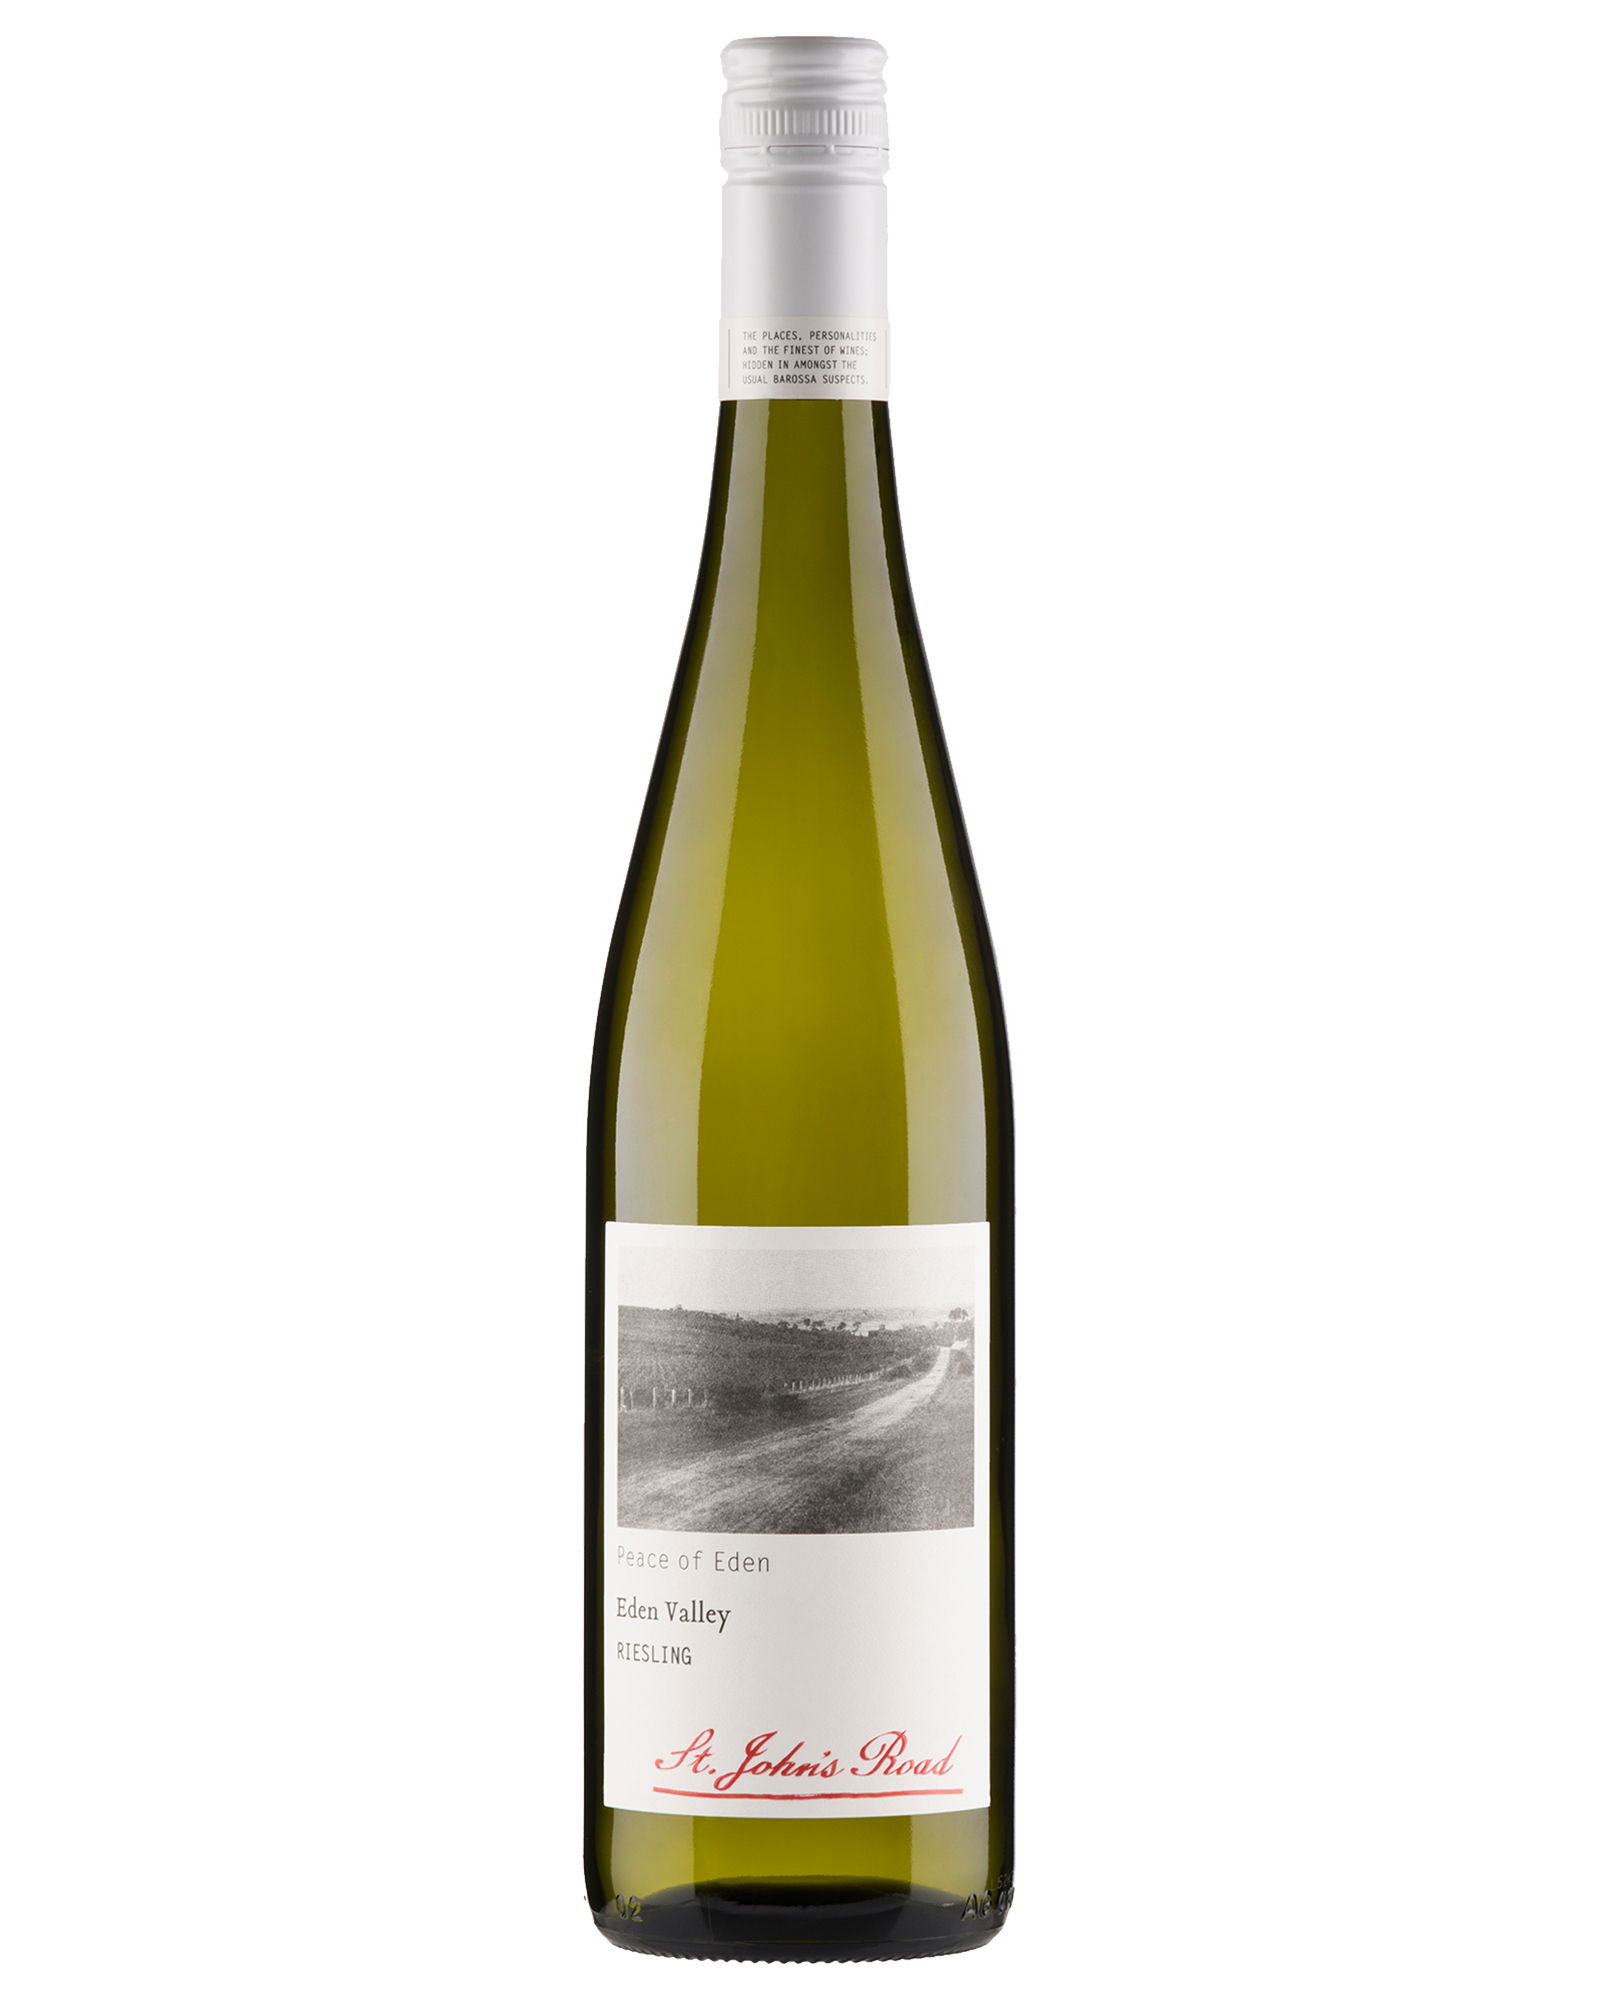 St John’s Road Peace of Eden Riesling